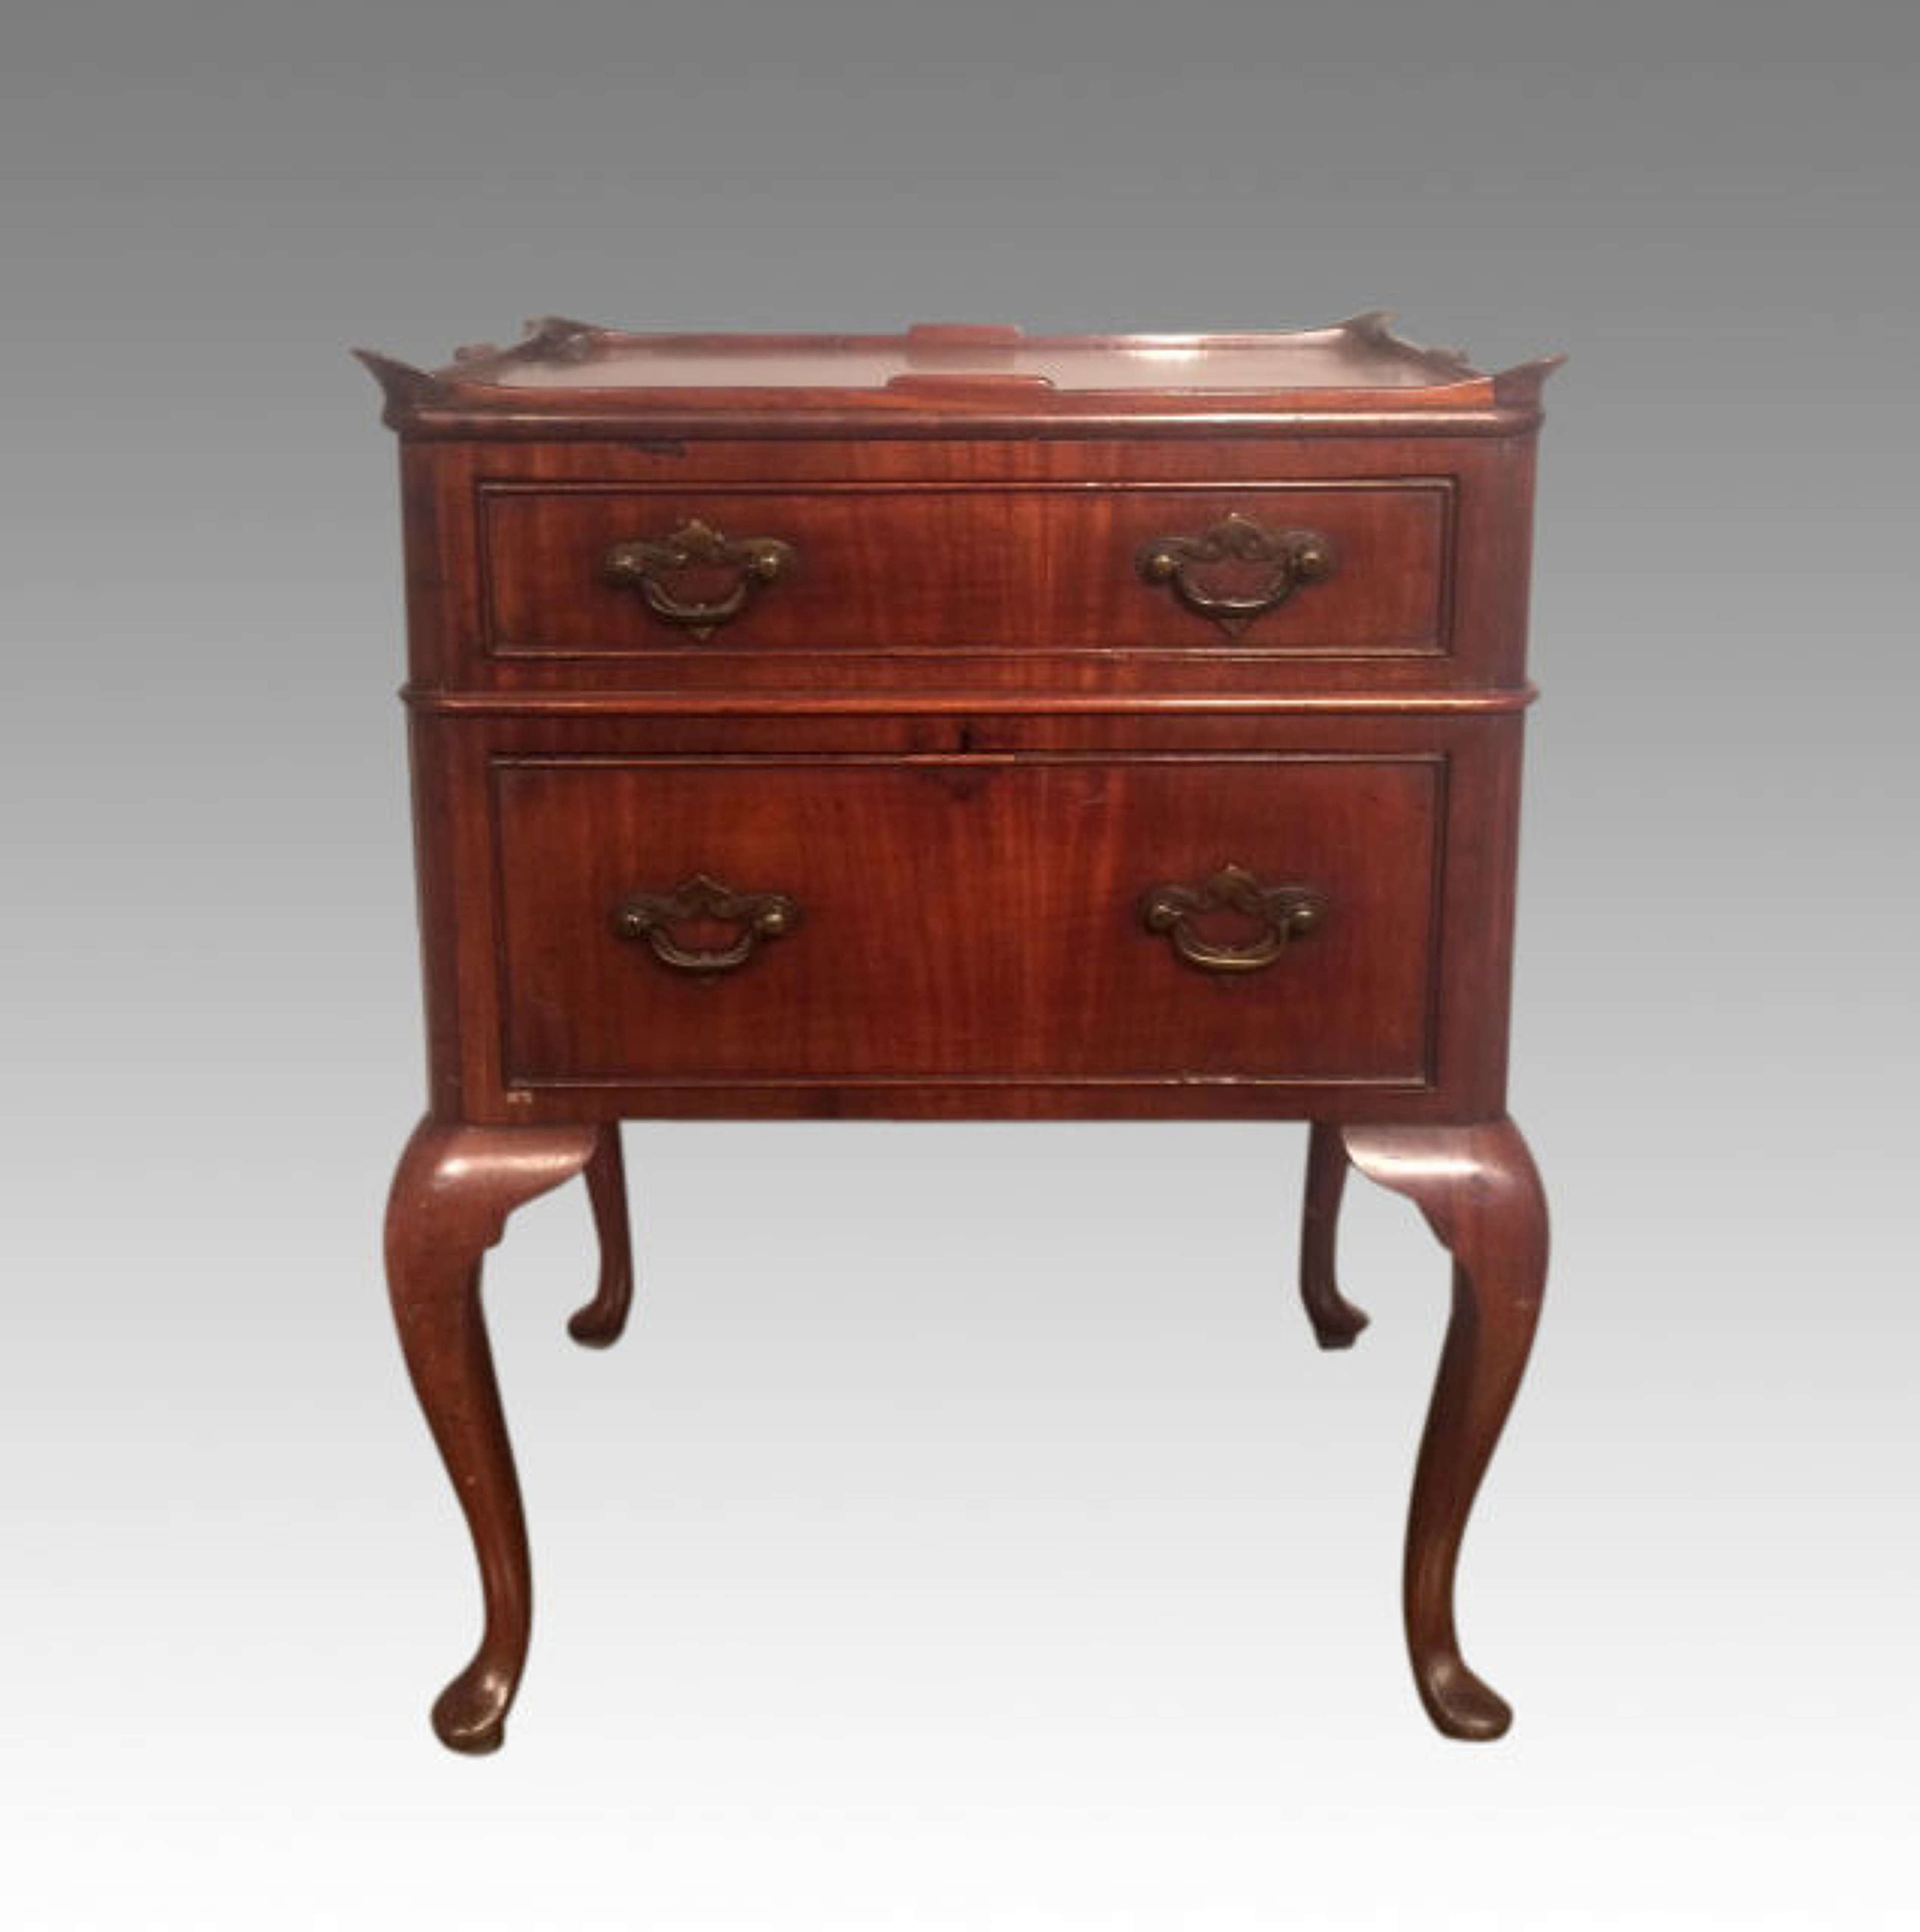 19th century antique mahogany cabriole leg bedside table in Wine Antiques